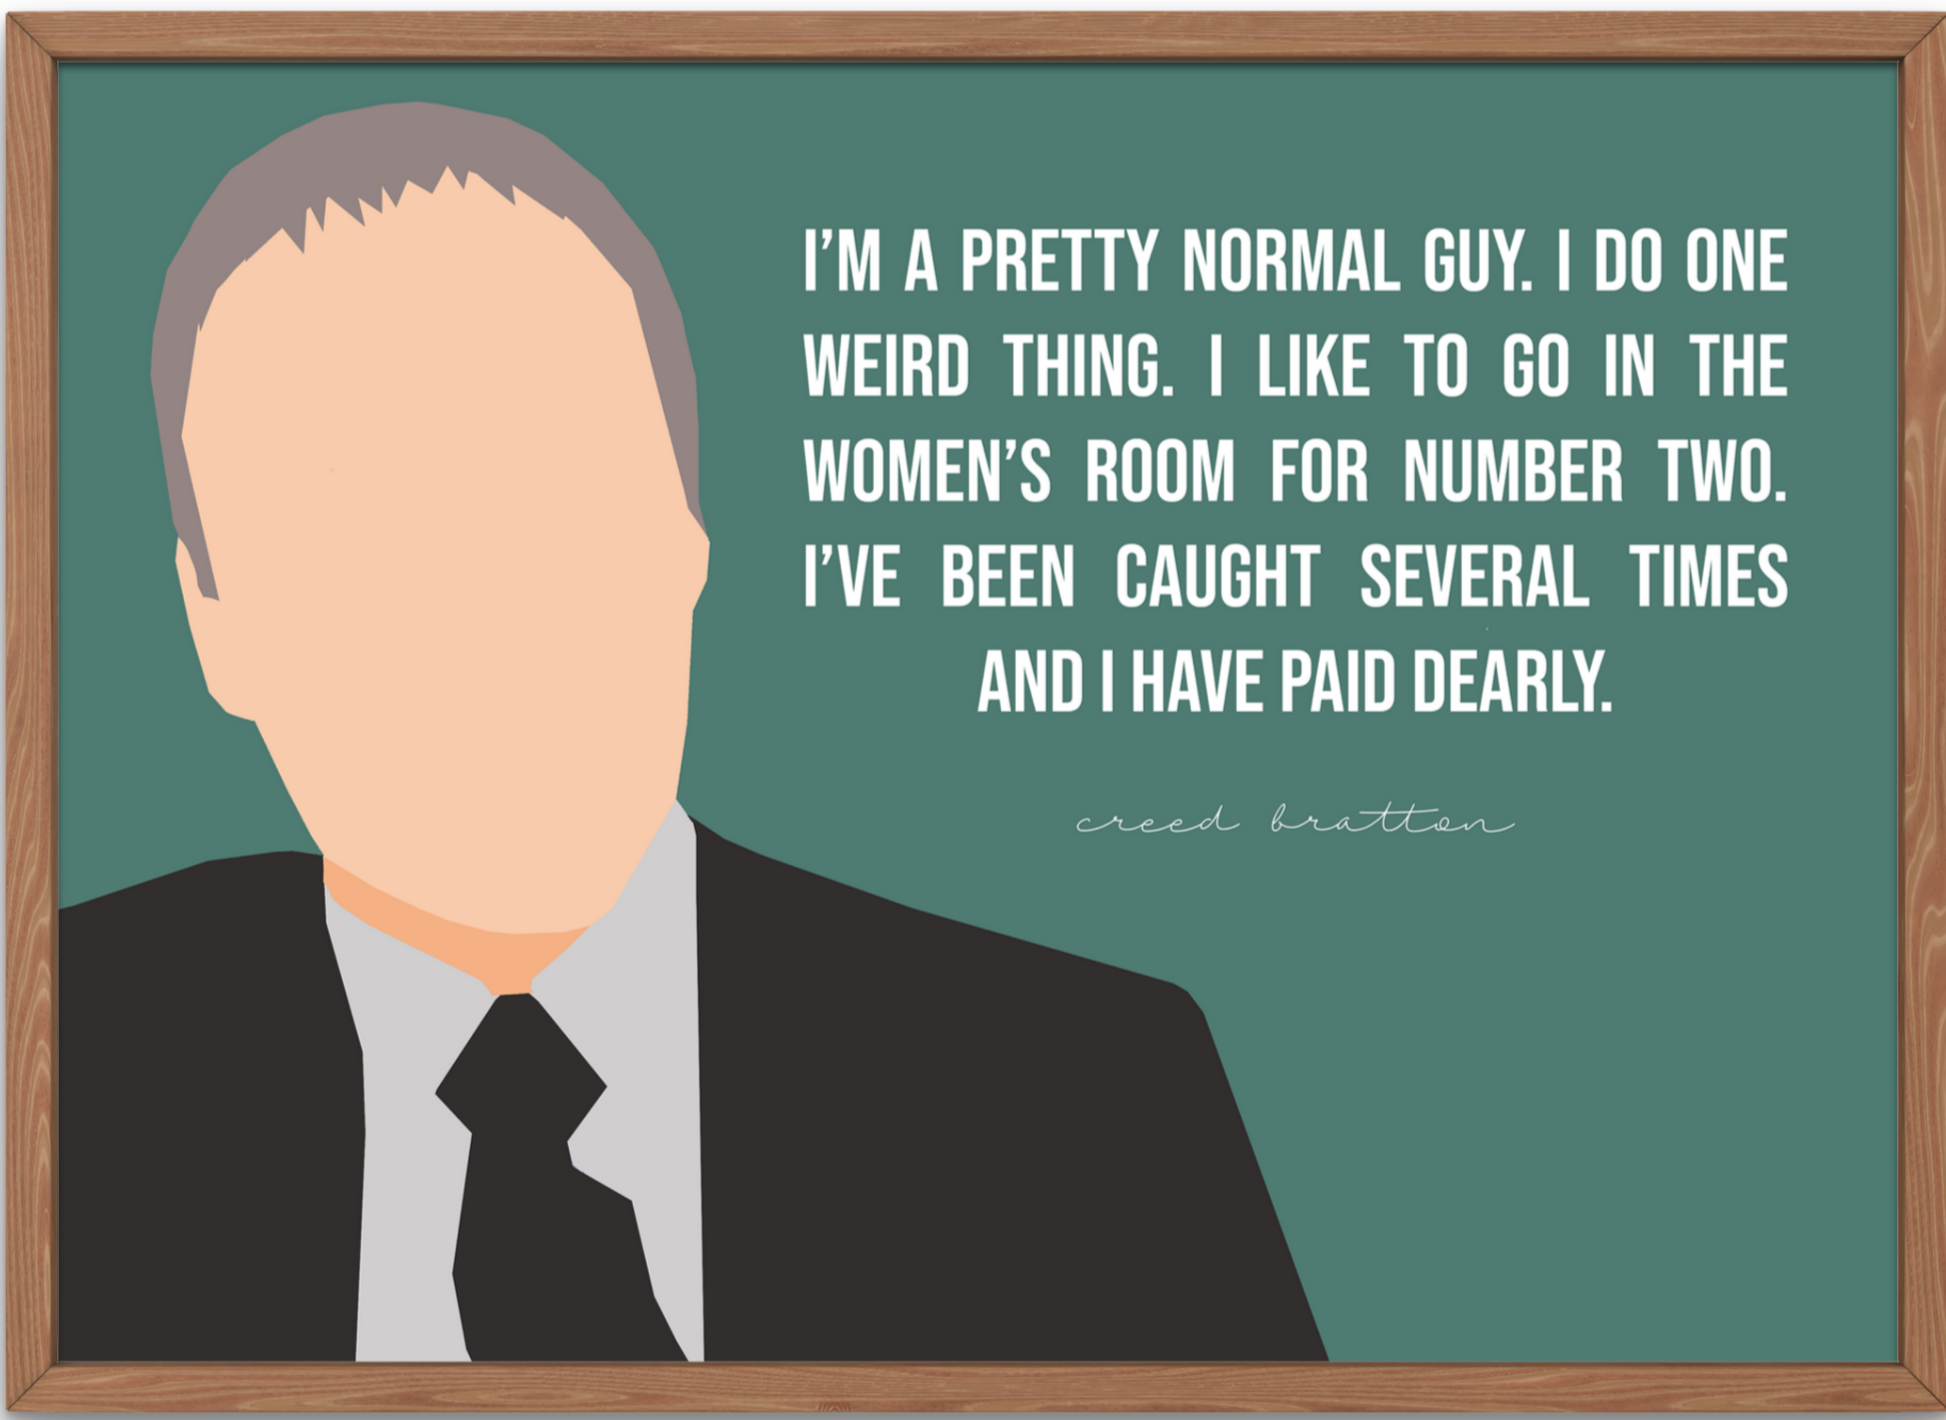 The Office Poster | Creed Bratton - 